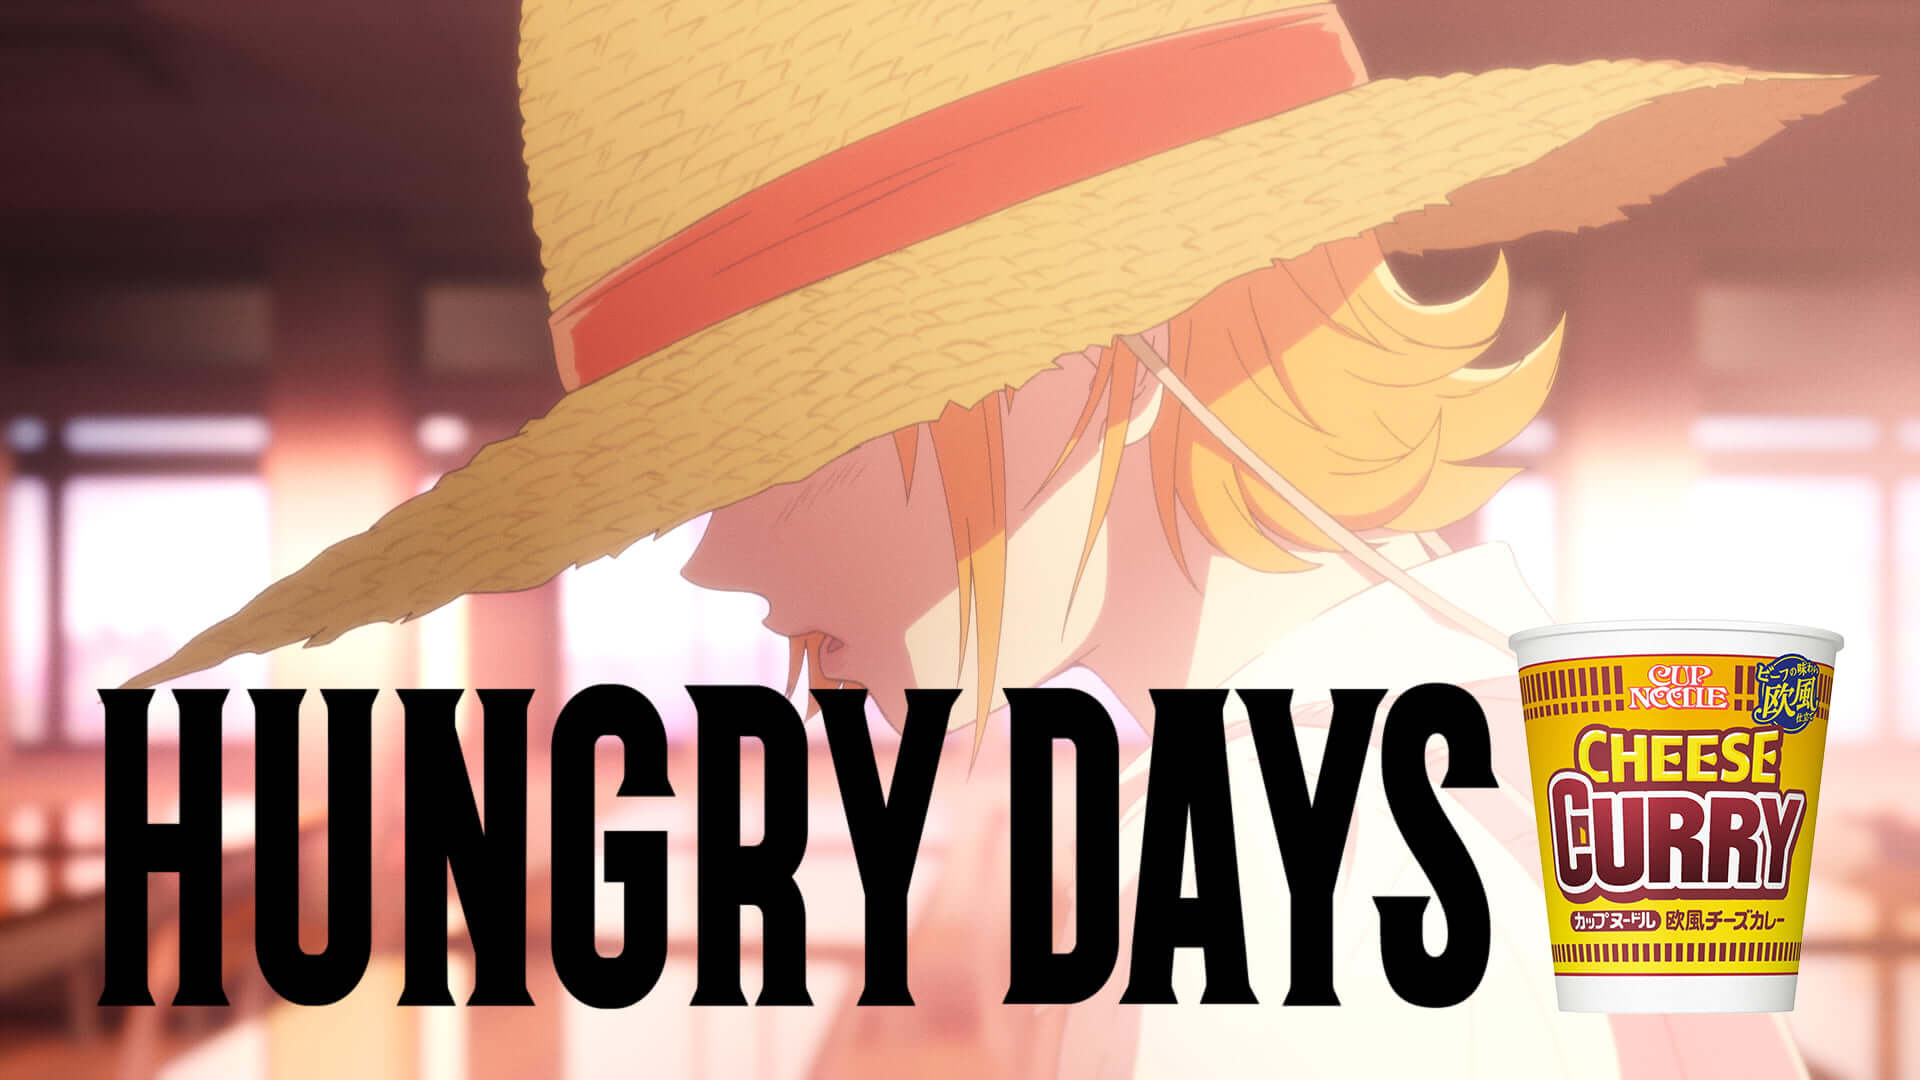 ONE PIECE、ナミの笑顔がまぶしい！カップヌードルCM「HUNGRY DAYS ワンピース ナミ篇」公開 art190913_onepiece_cupnoodle_4-1920x1080